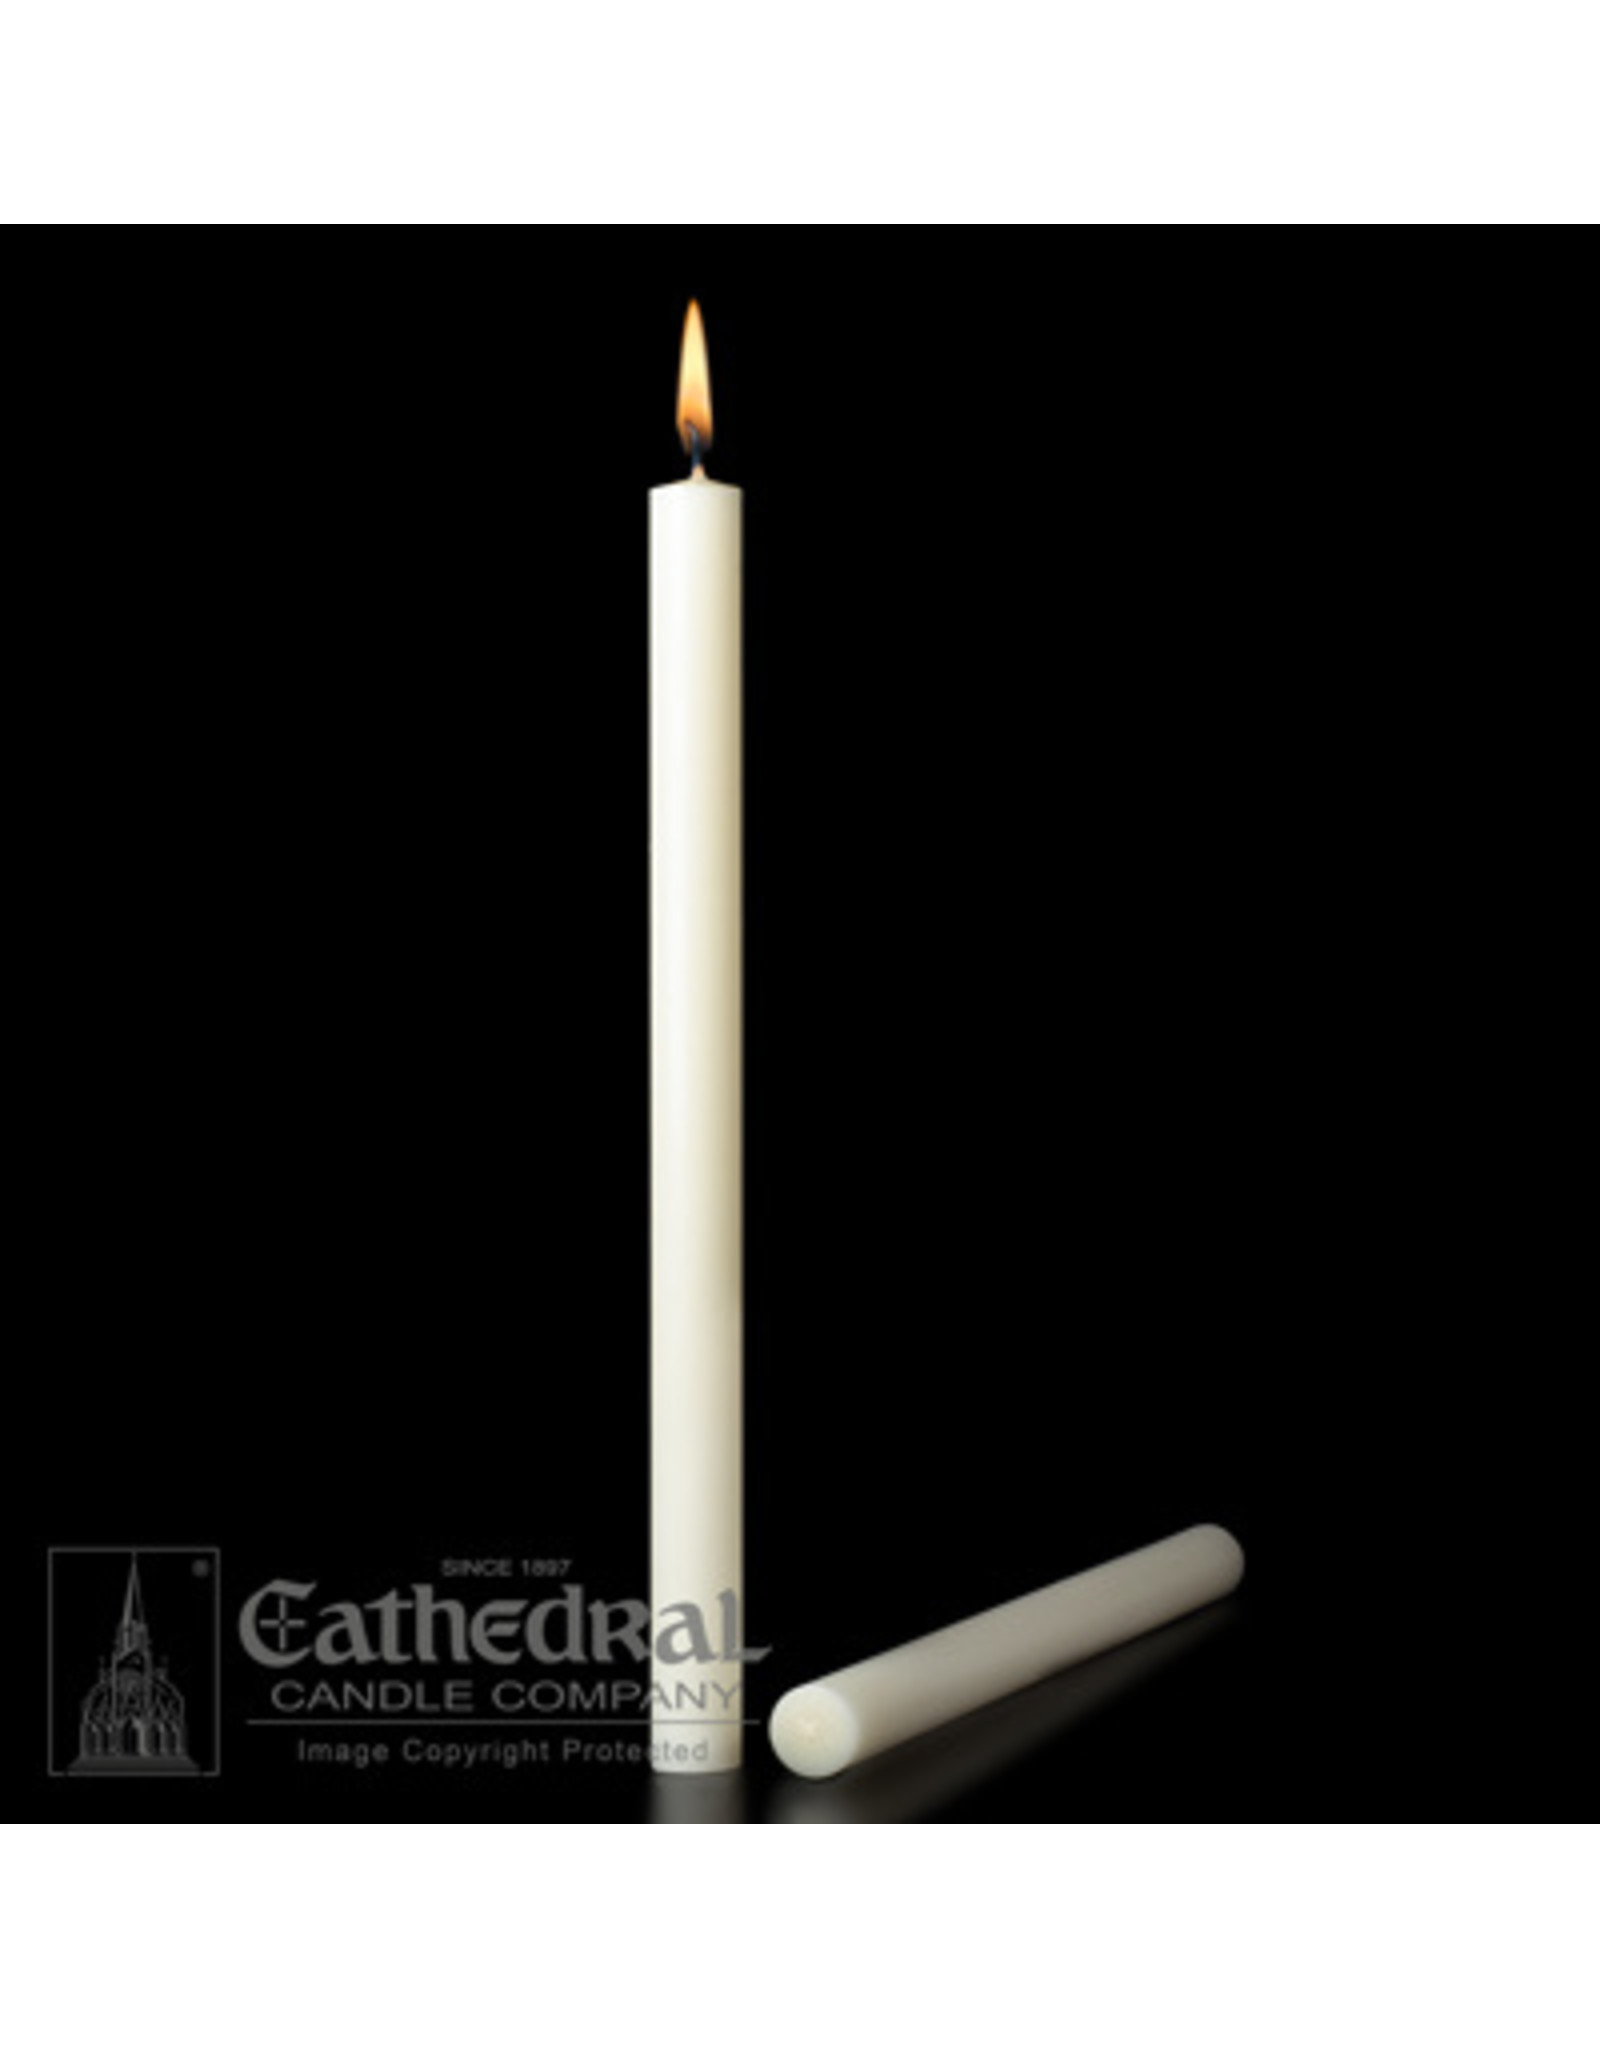 Cathedral Candle 51% Beeswax Altar Candles 1.5"x34" PE (2)